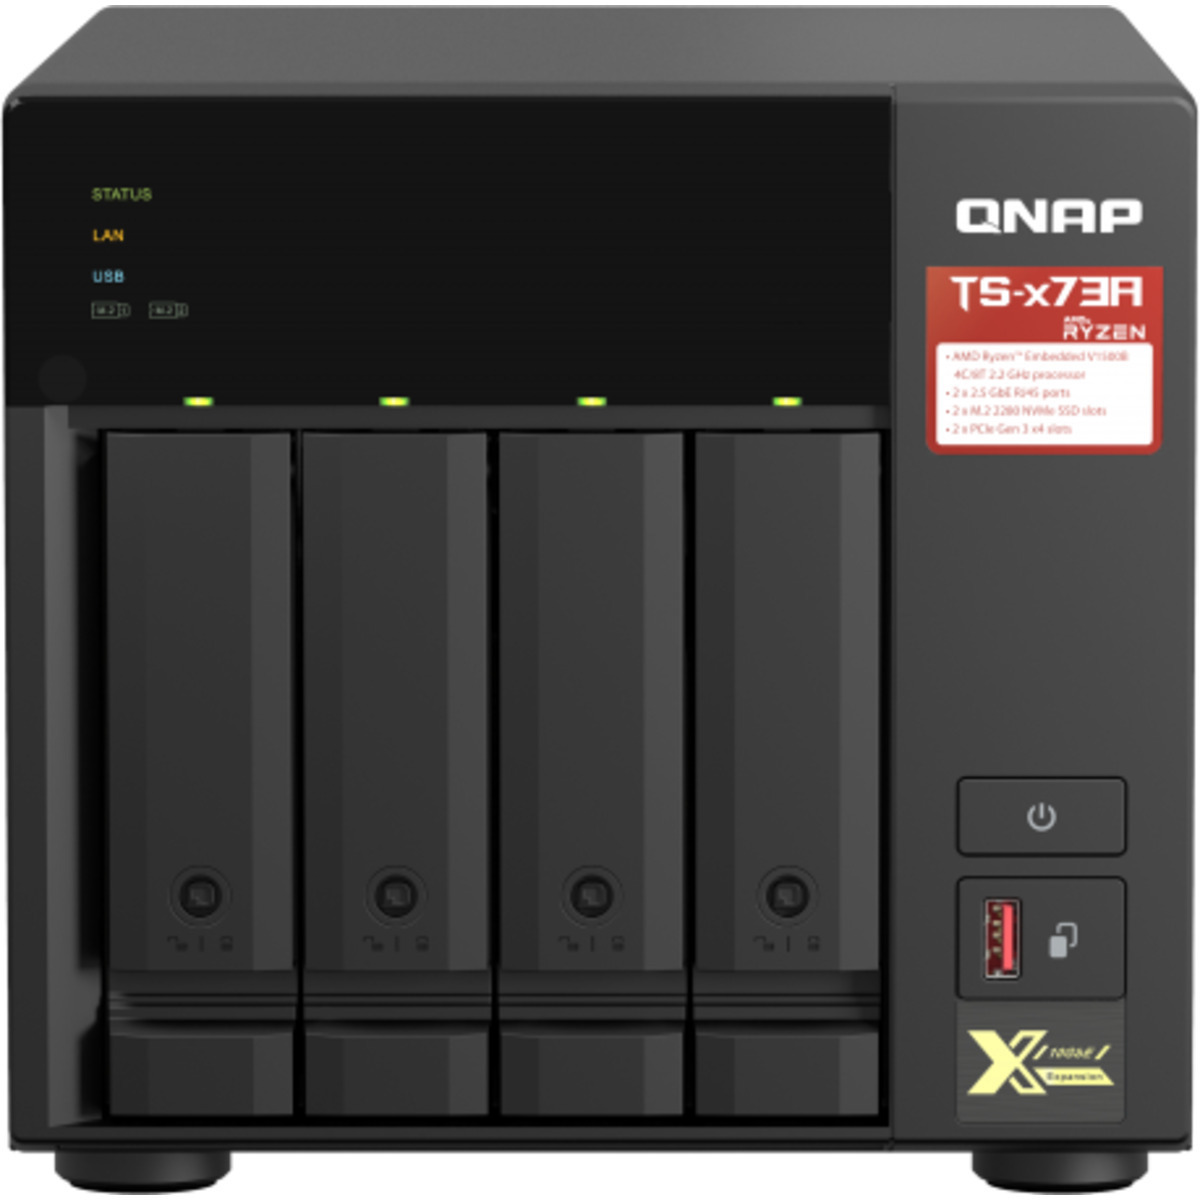 QNAP TS-473A 16tb 4-Bay Desktop Multimedia / Power User / Business NAS - Network Attached Storage Device 4x4tb Western Digital Blue WD40EZRZ 3.5 5400rpm SATA 6Gb/s HDD CONSUMER Class Drives Installed - Burn-In Tested TS-473A